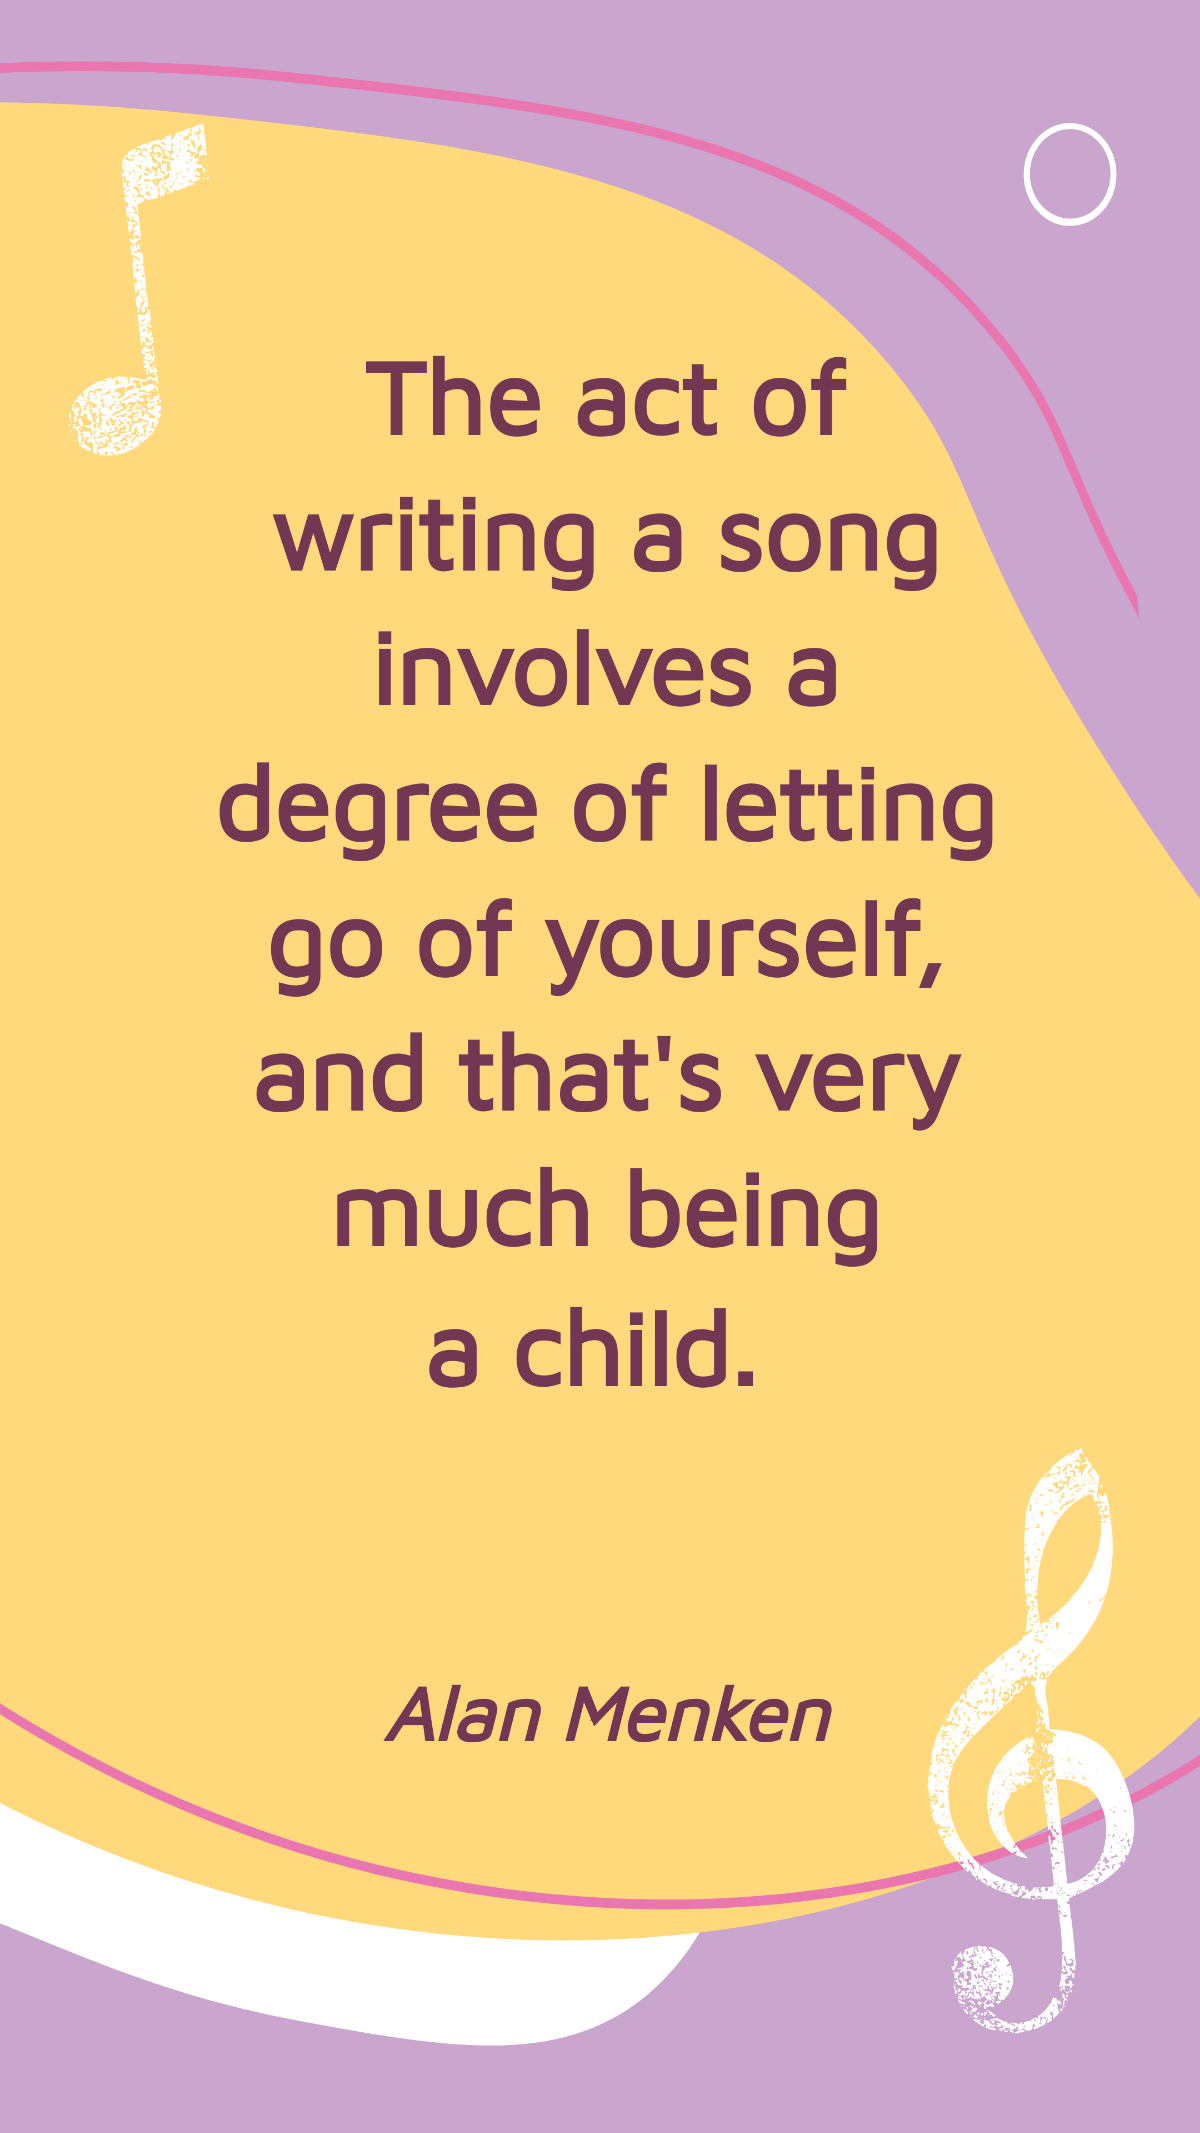 Free Alan Menken - The act of writing a song involves a degree of letting go of yourself, and that's very much being a child. Template